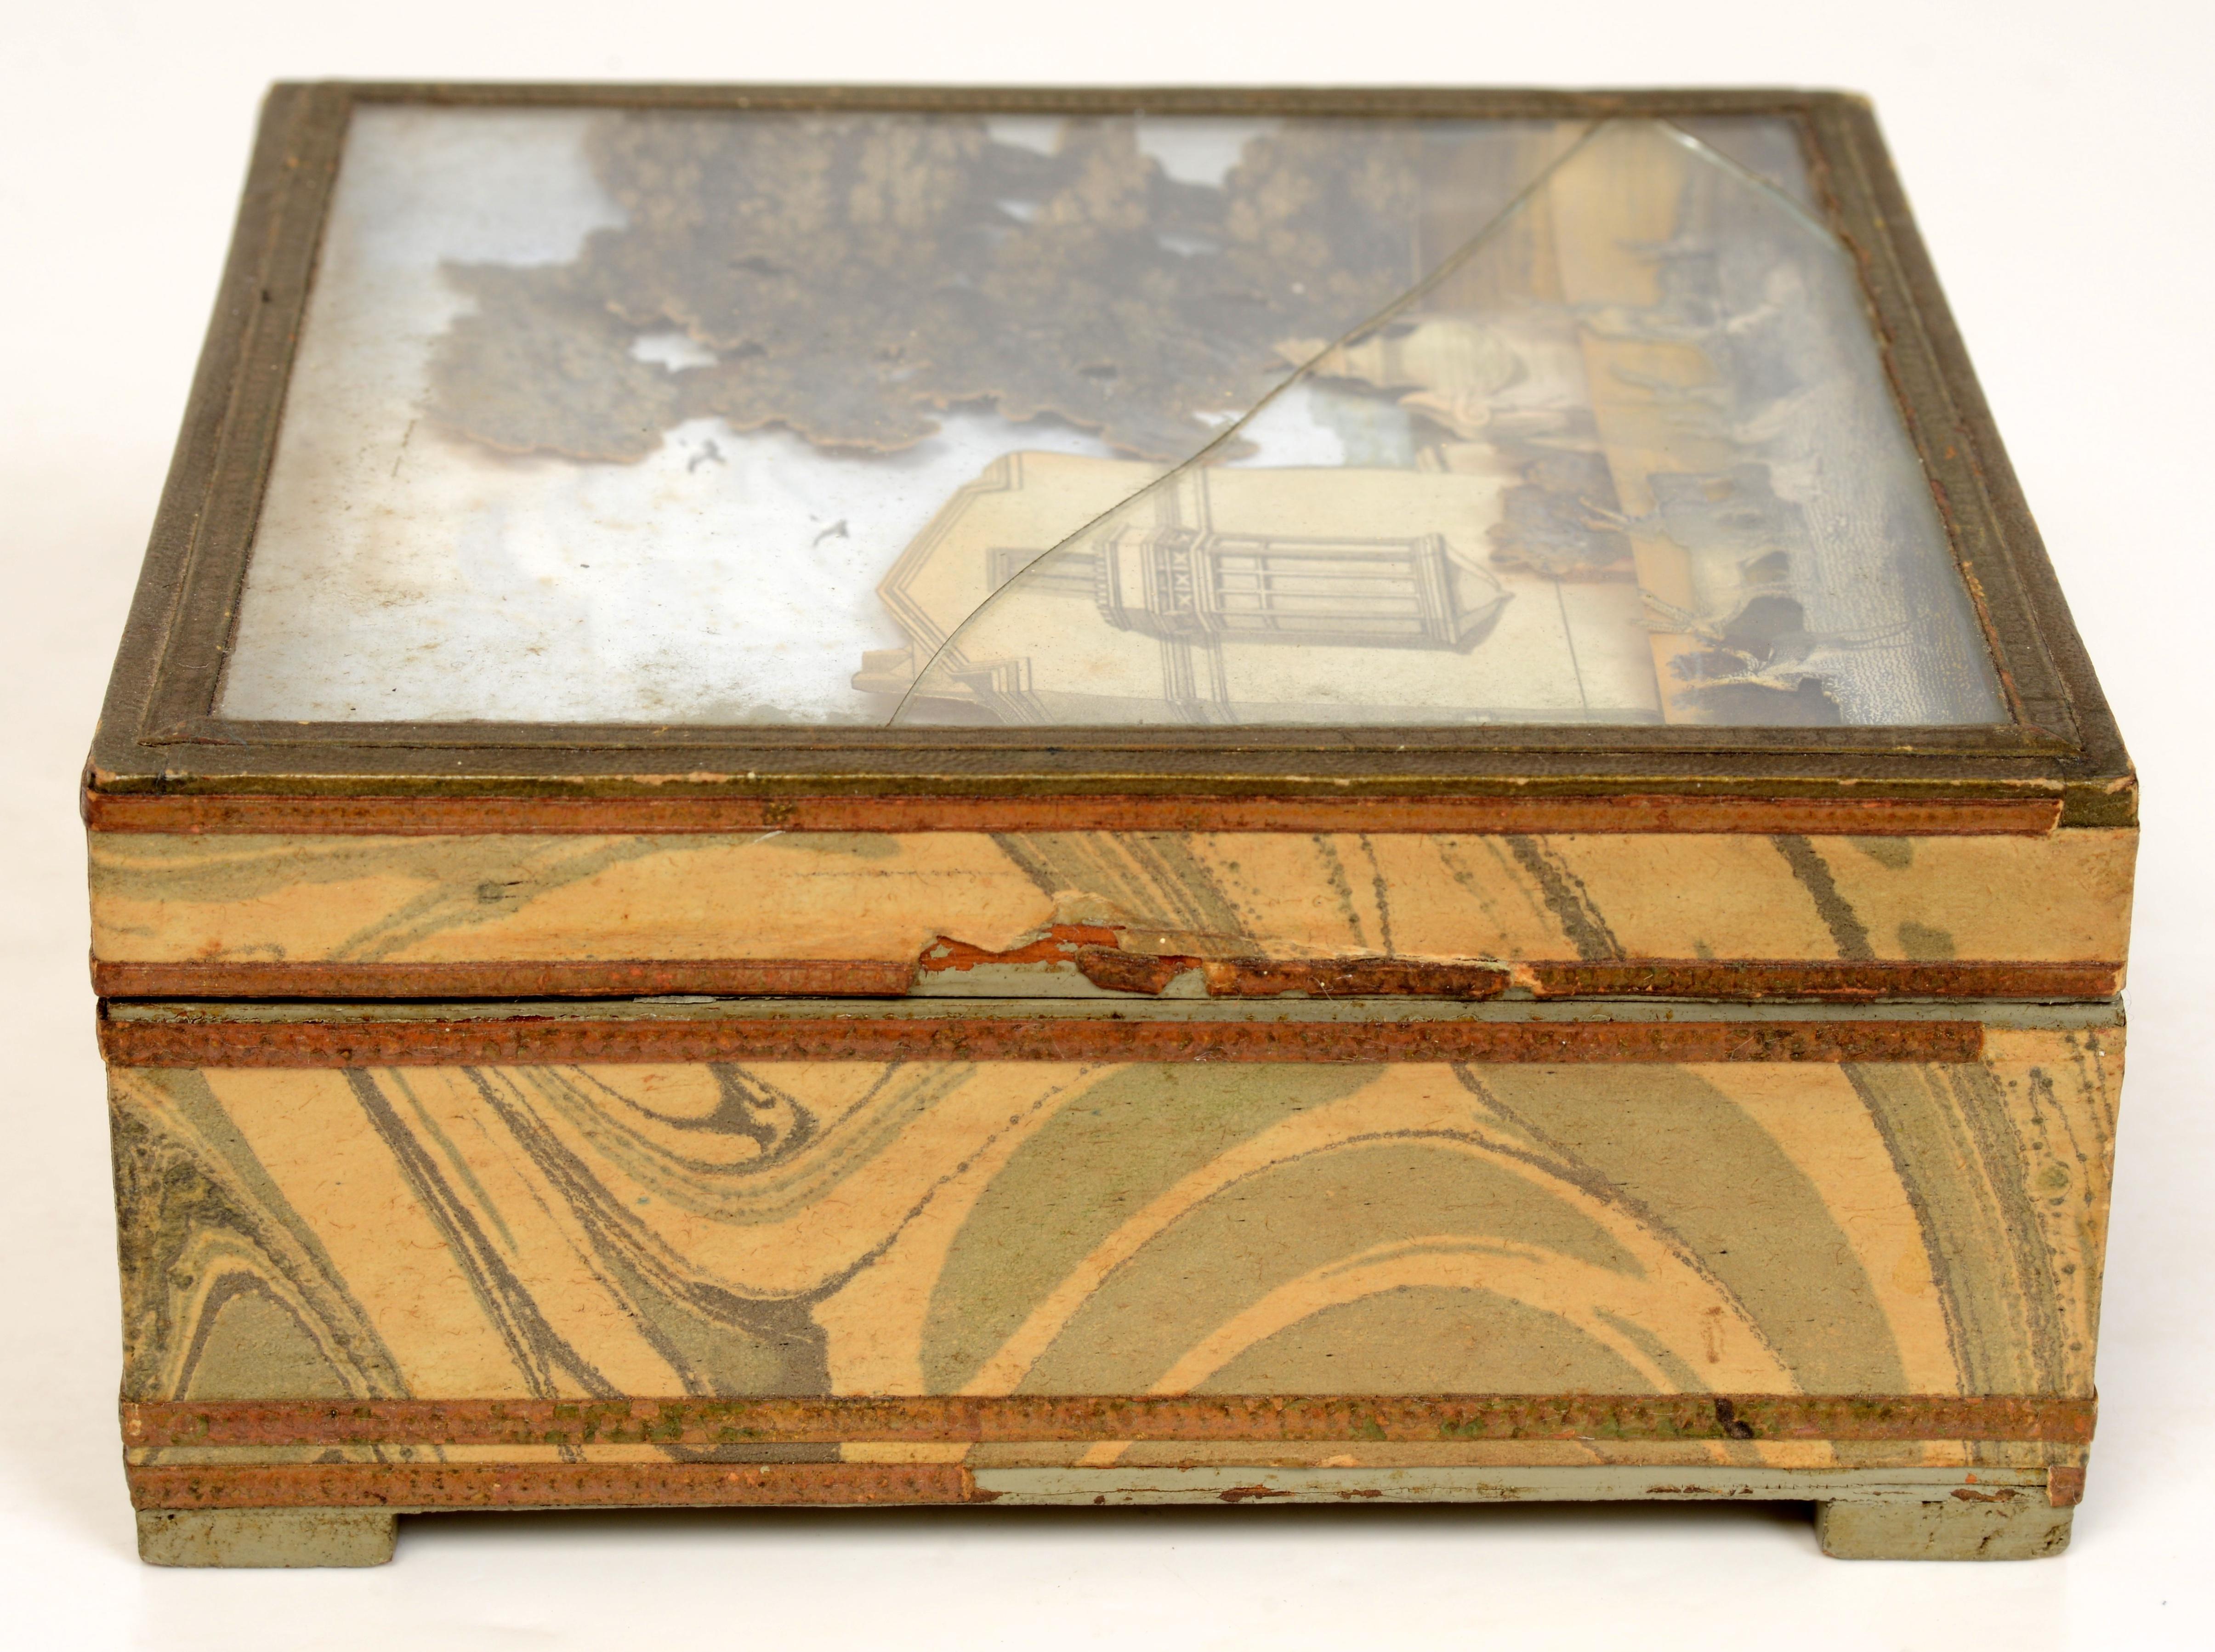 Mid-19th Century French 19th c Paper Covered Box With Neo-Classical Diorama Under the Glass Top For Sale